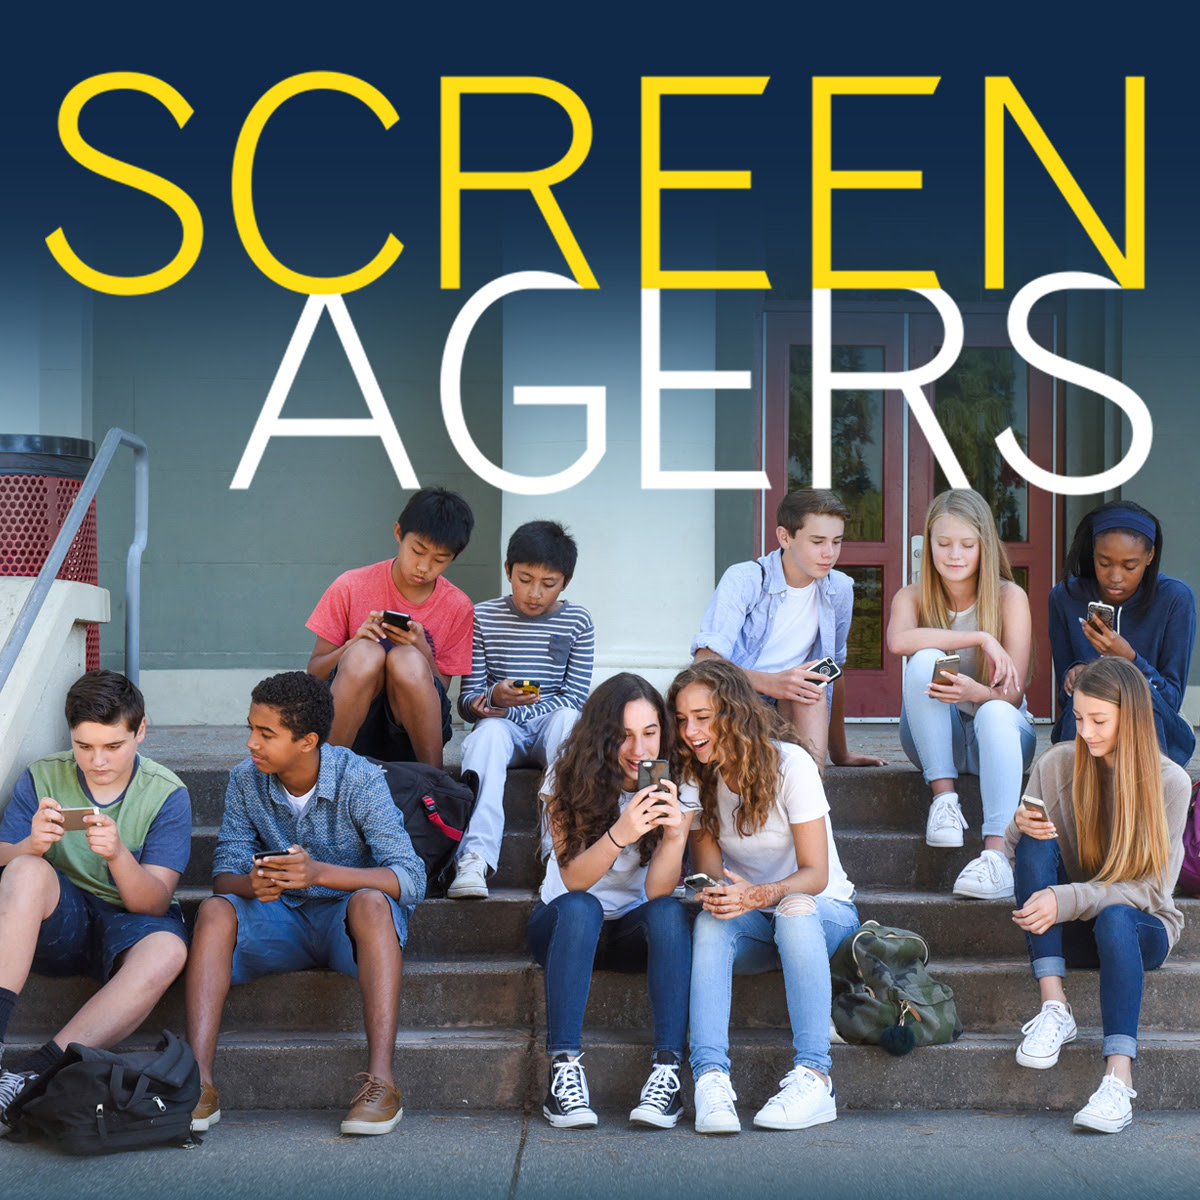 Screenagers Film Presented By OFFER (Oneonta Foundation for Educational Resources)